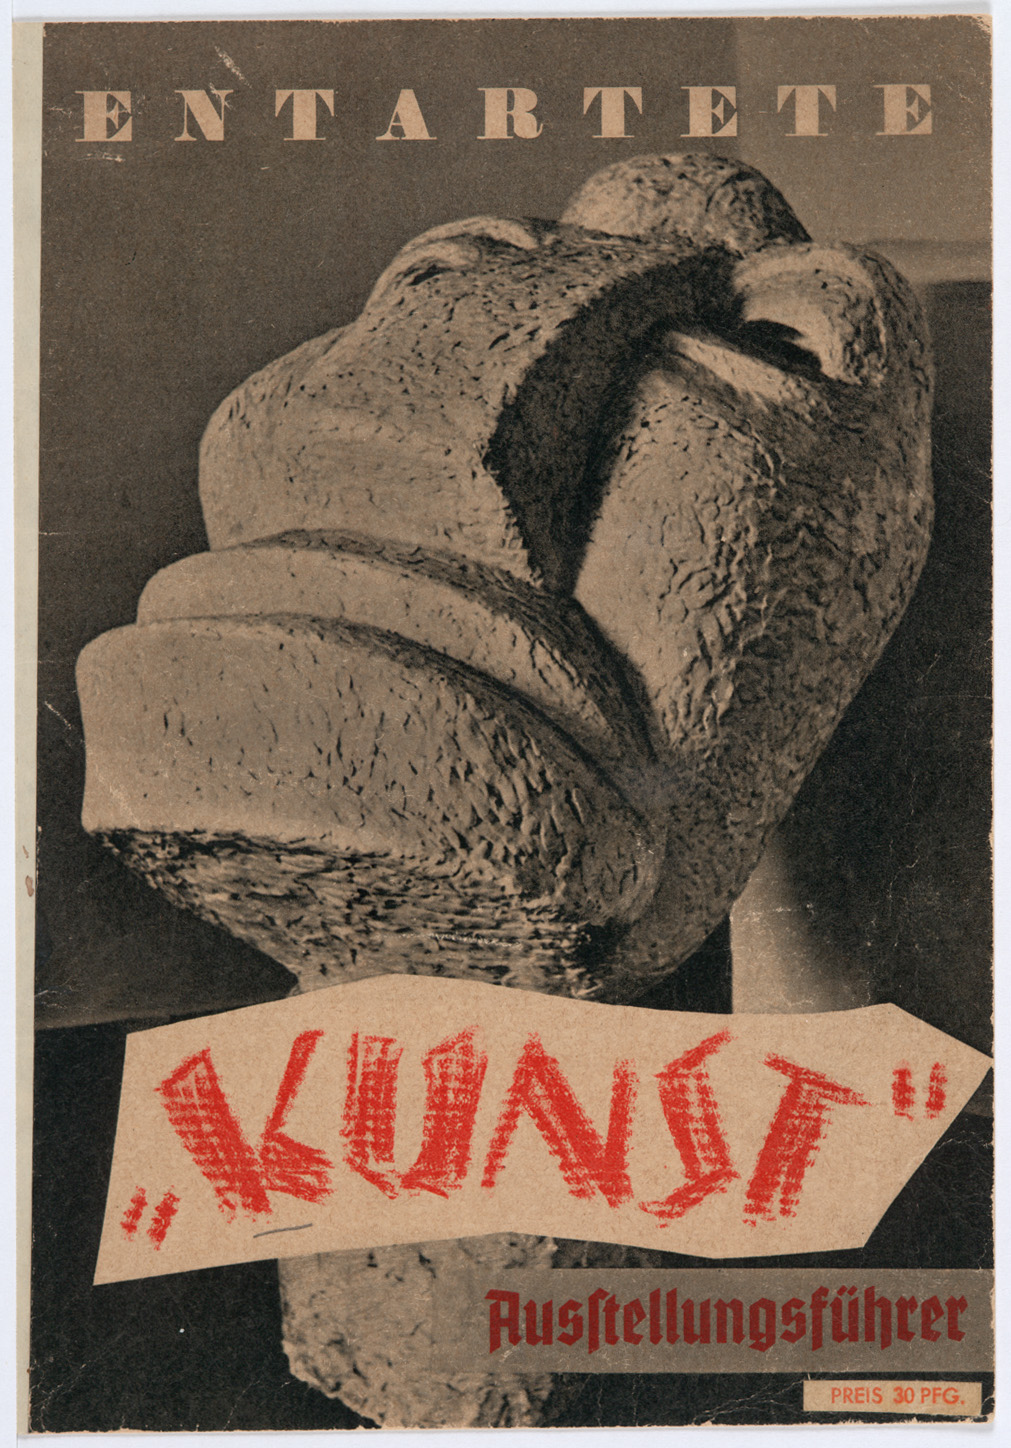 Otto Freundlich. Ausstellungsführer Entartete Kunst.By Front cover of the guide for the "Degenerate Art Exhibition" (Entartete Kunst Ausstellung), a propaganda show organized by the Nazi Party 1937. The sculpture in the cover photo is "Der neue Mensch" ("L'Homme nouveau") made by Otto Freundlich (1878–1943) in 1912. Author of the metadata: Deutsche Fotothek - http://www.deutschefotothek.de/documents/obj/90013232, CC BY-SA 4.0, https://commons.wikimedia.org/w/index.php?curid=101092569